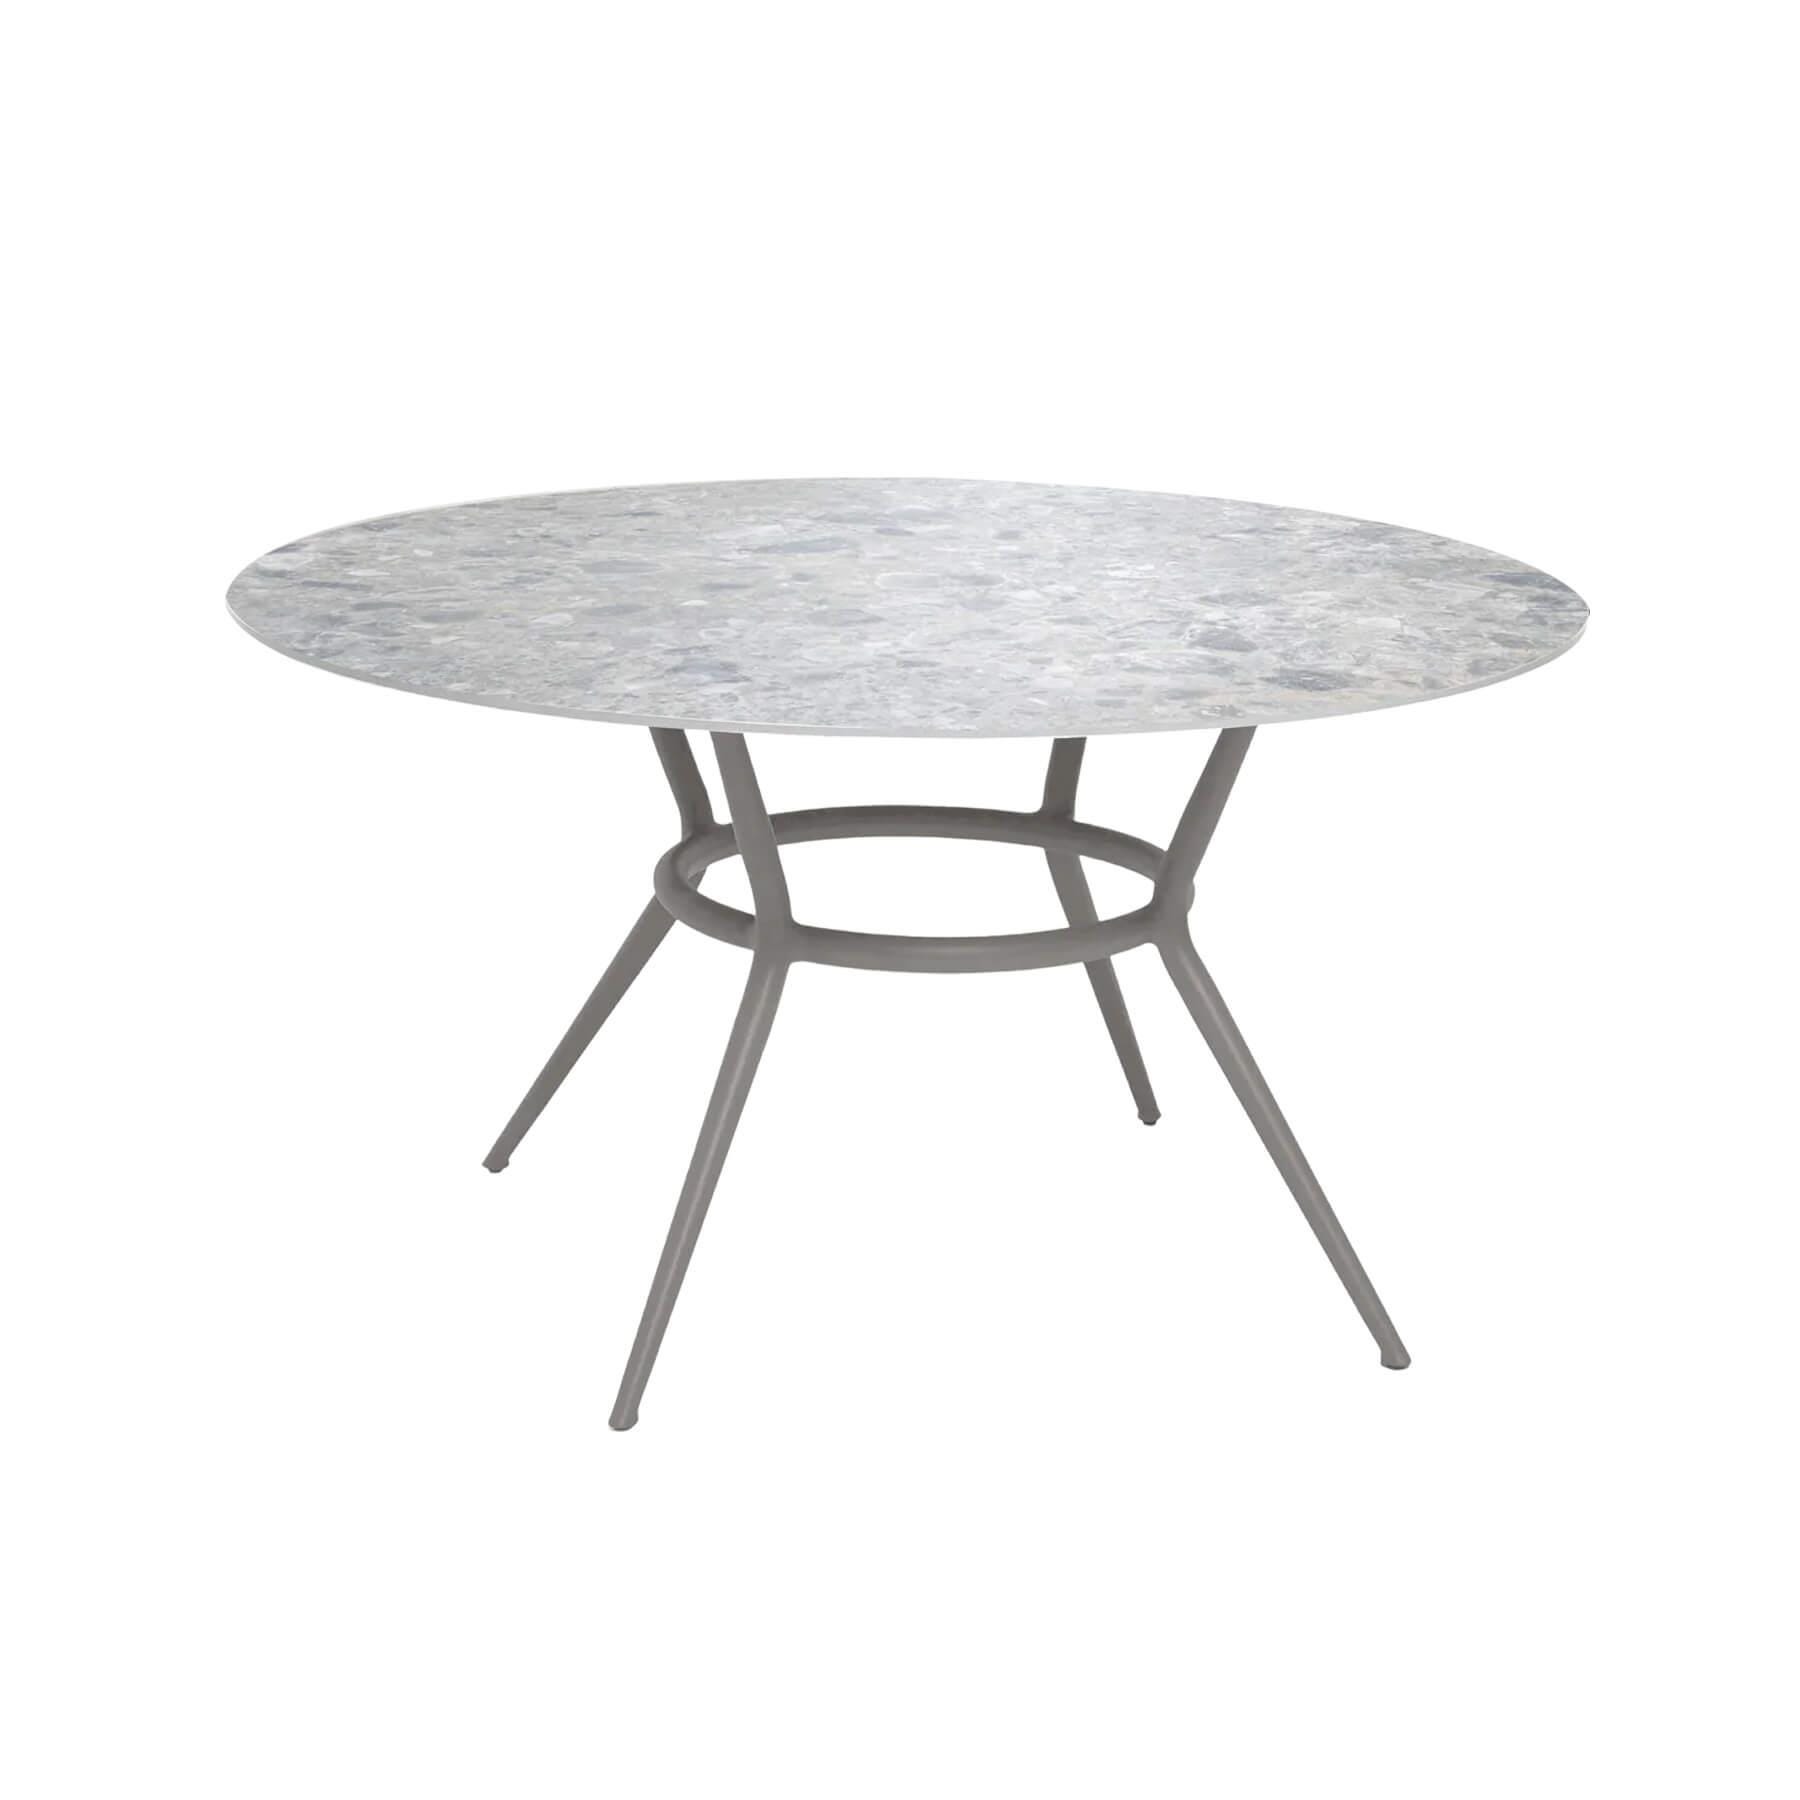 Caneline Joy Outdoor Dining Table Round Ceramic Multi Colour Top Taupe Legs